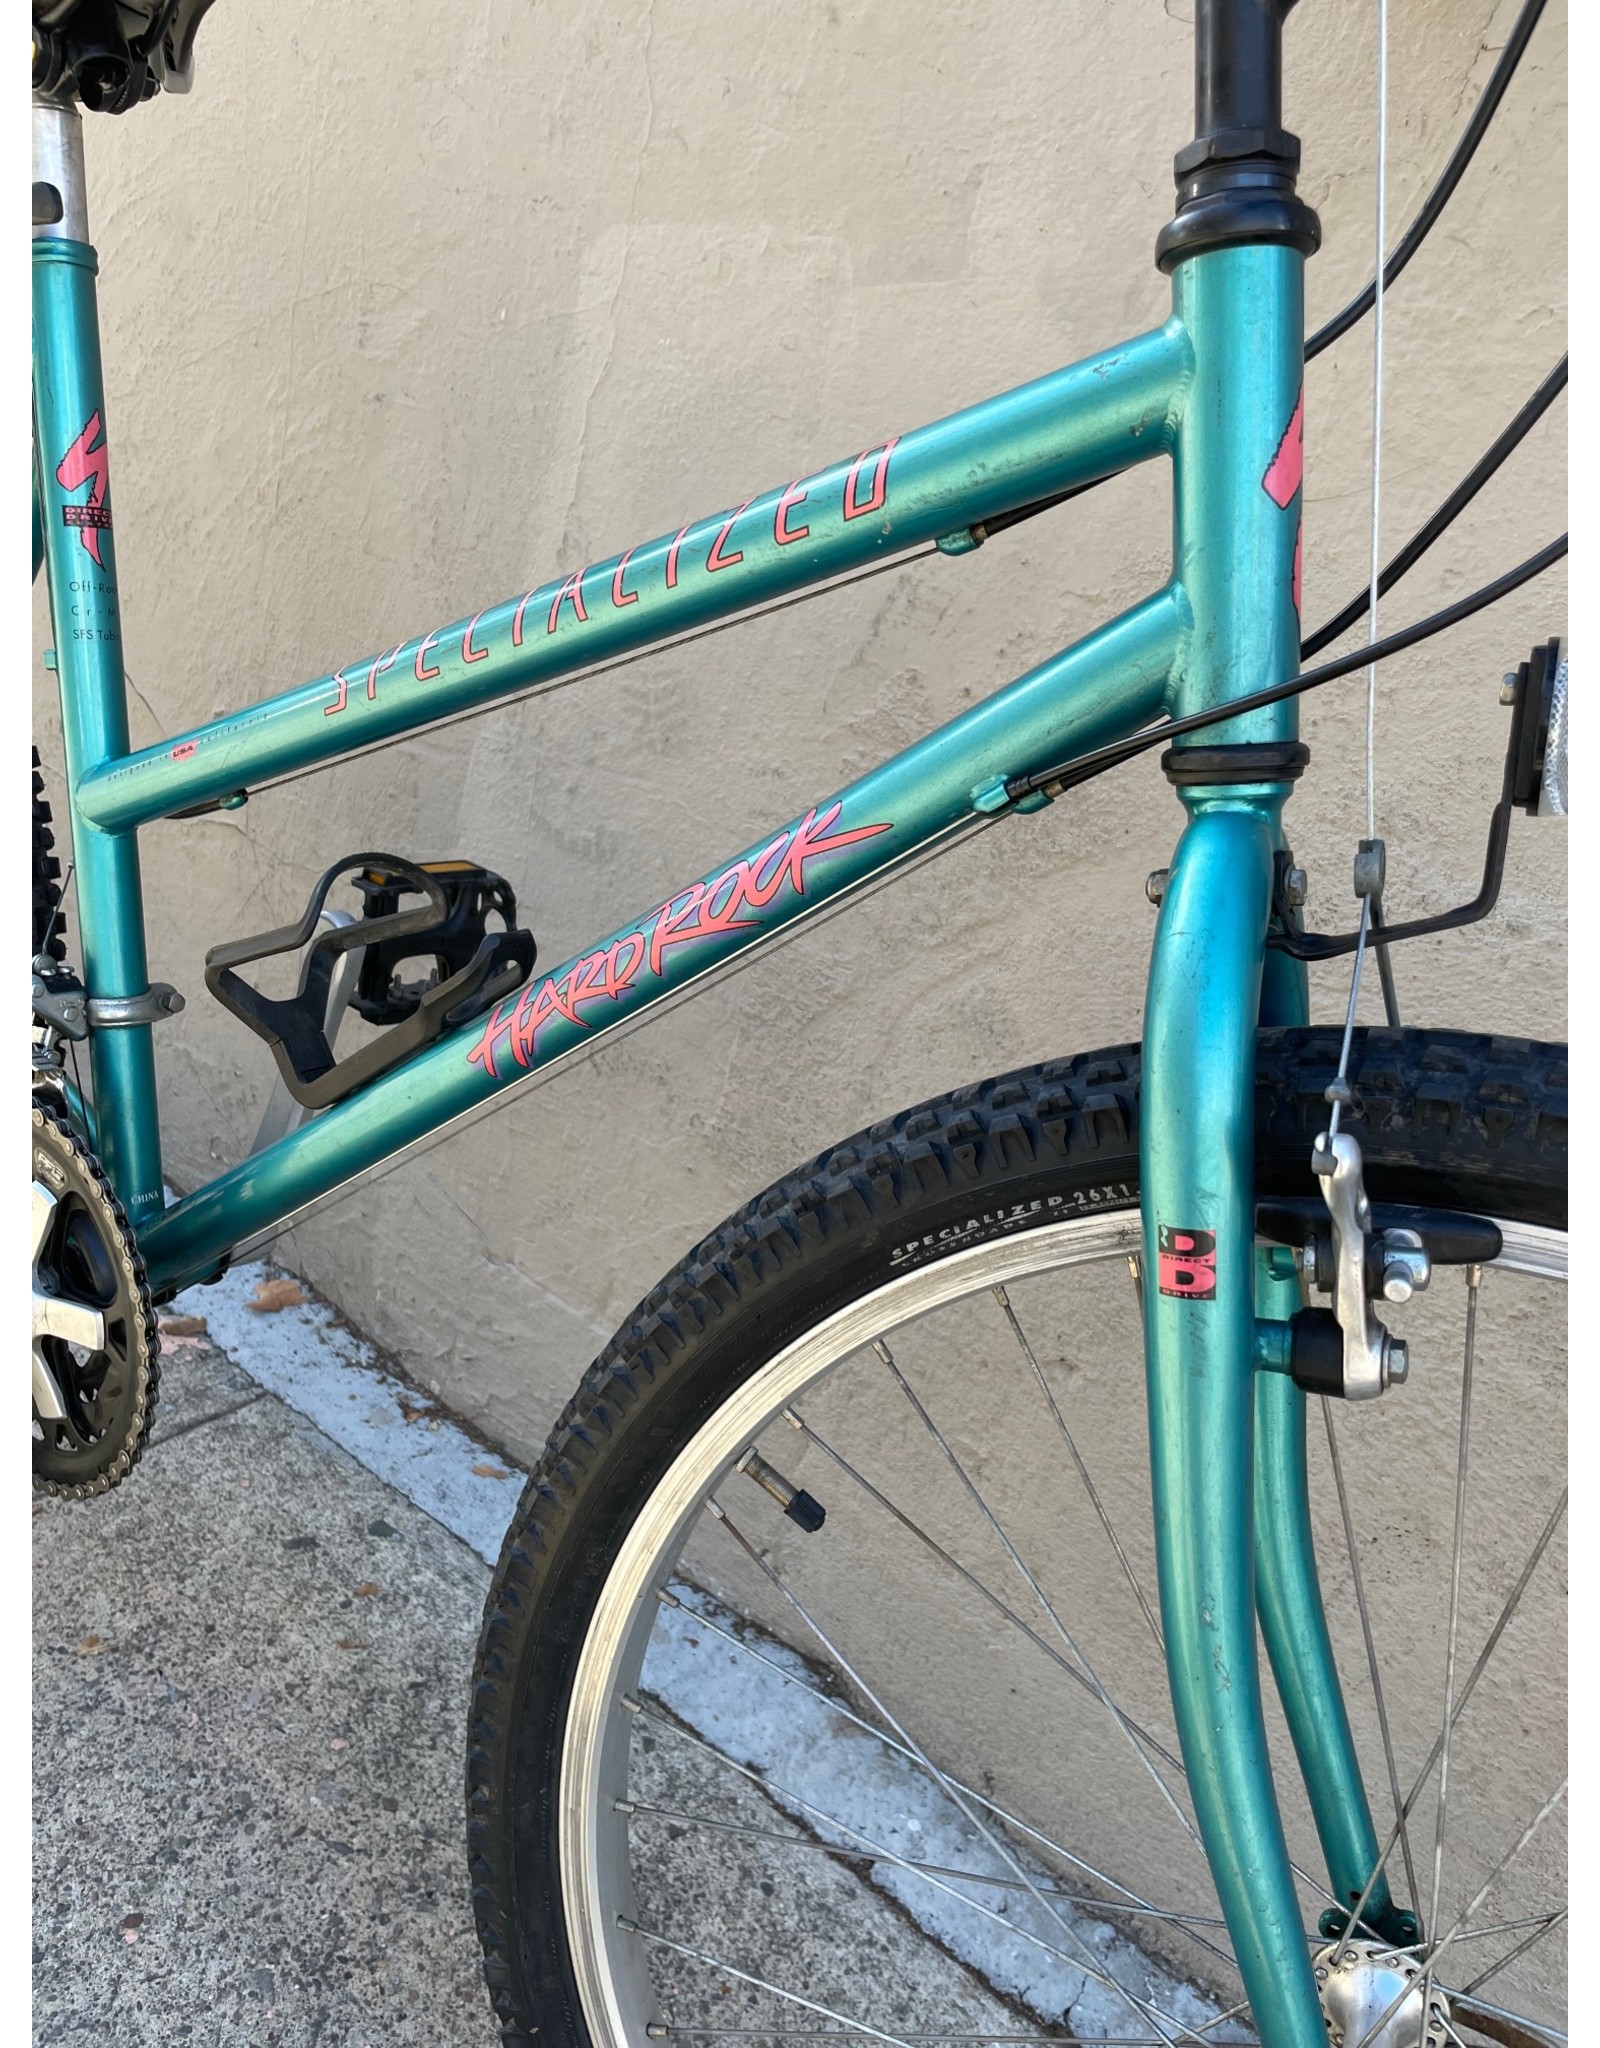 Specialized Specialized Hardrock Vintage,  19 Inches, Teal w/ Pink